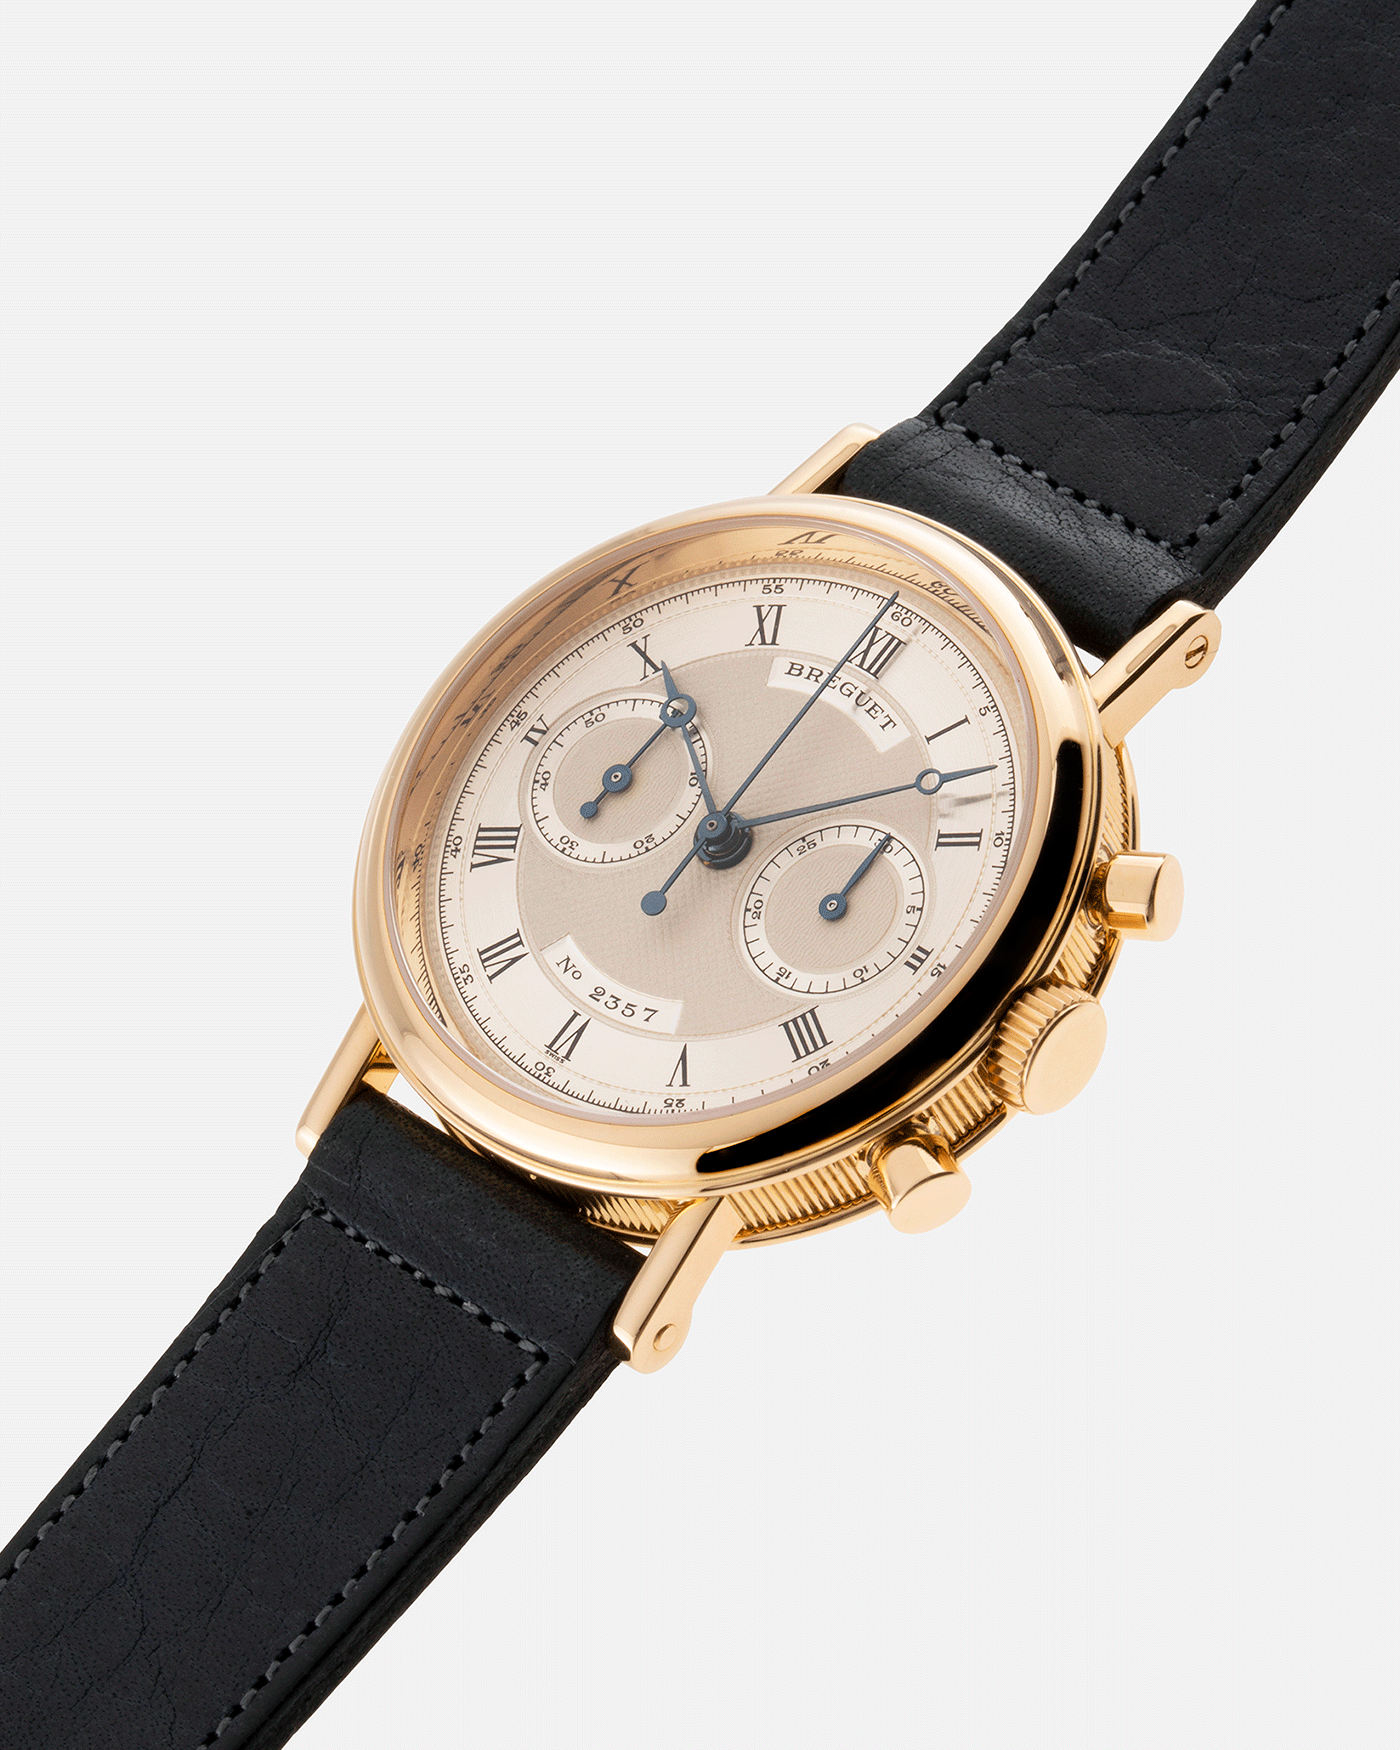 Brand: Breguet Year: 1990’s Model: 3237 Material: 18k Yellow Gold Movement: Lemania 2310 Case Diameter: 36mm Strap: Accurate Form Navy Blue Calf